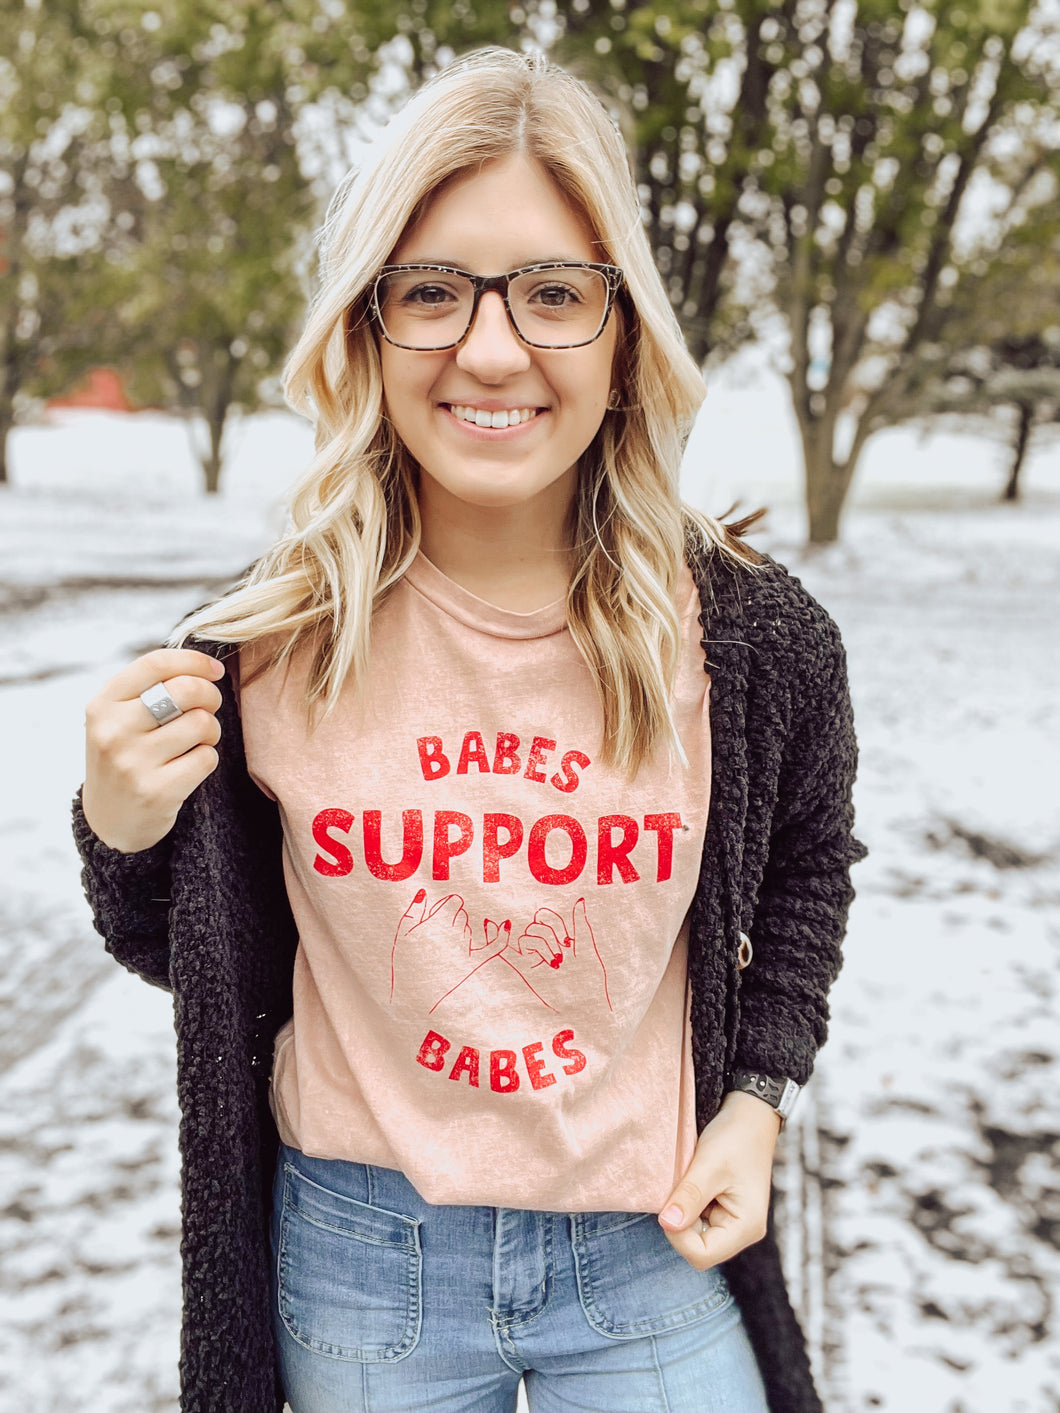 Babes Support Babes Graphic Tee